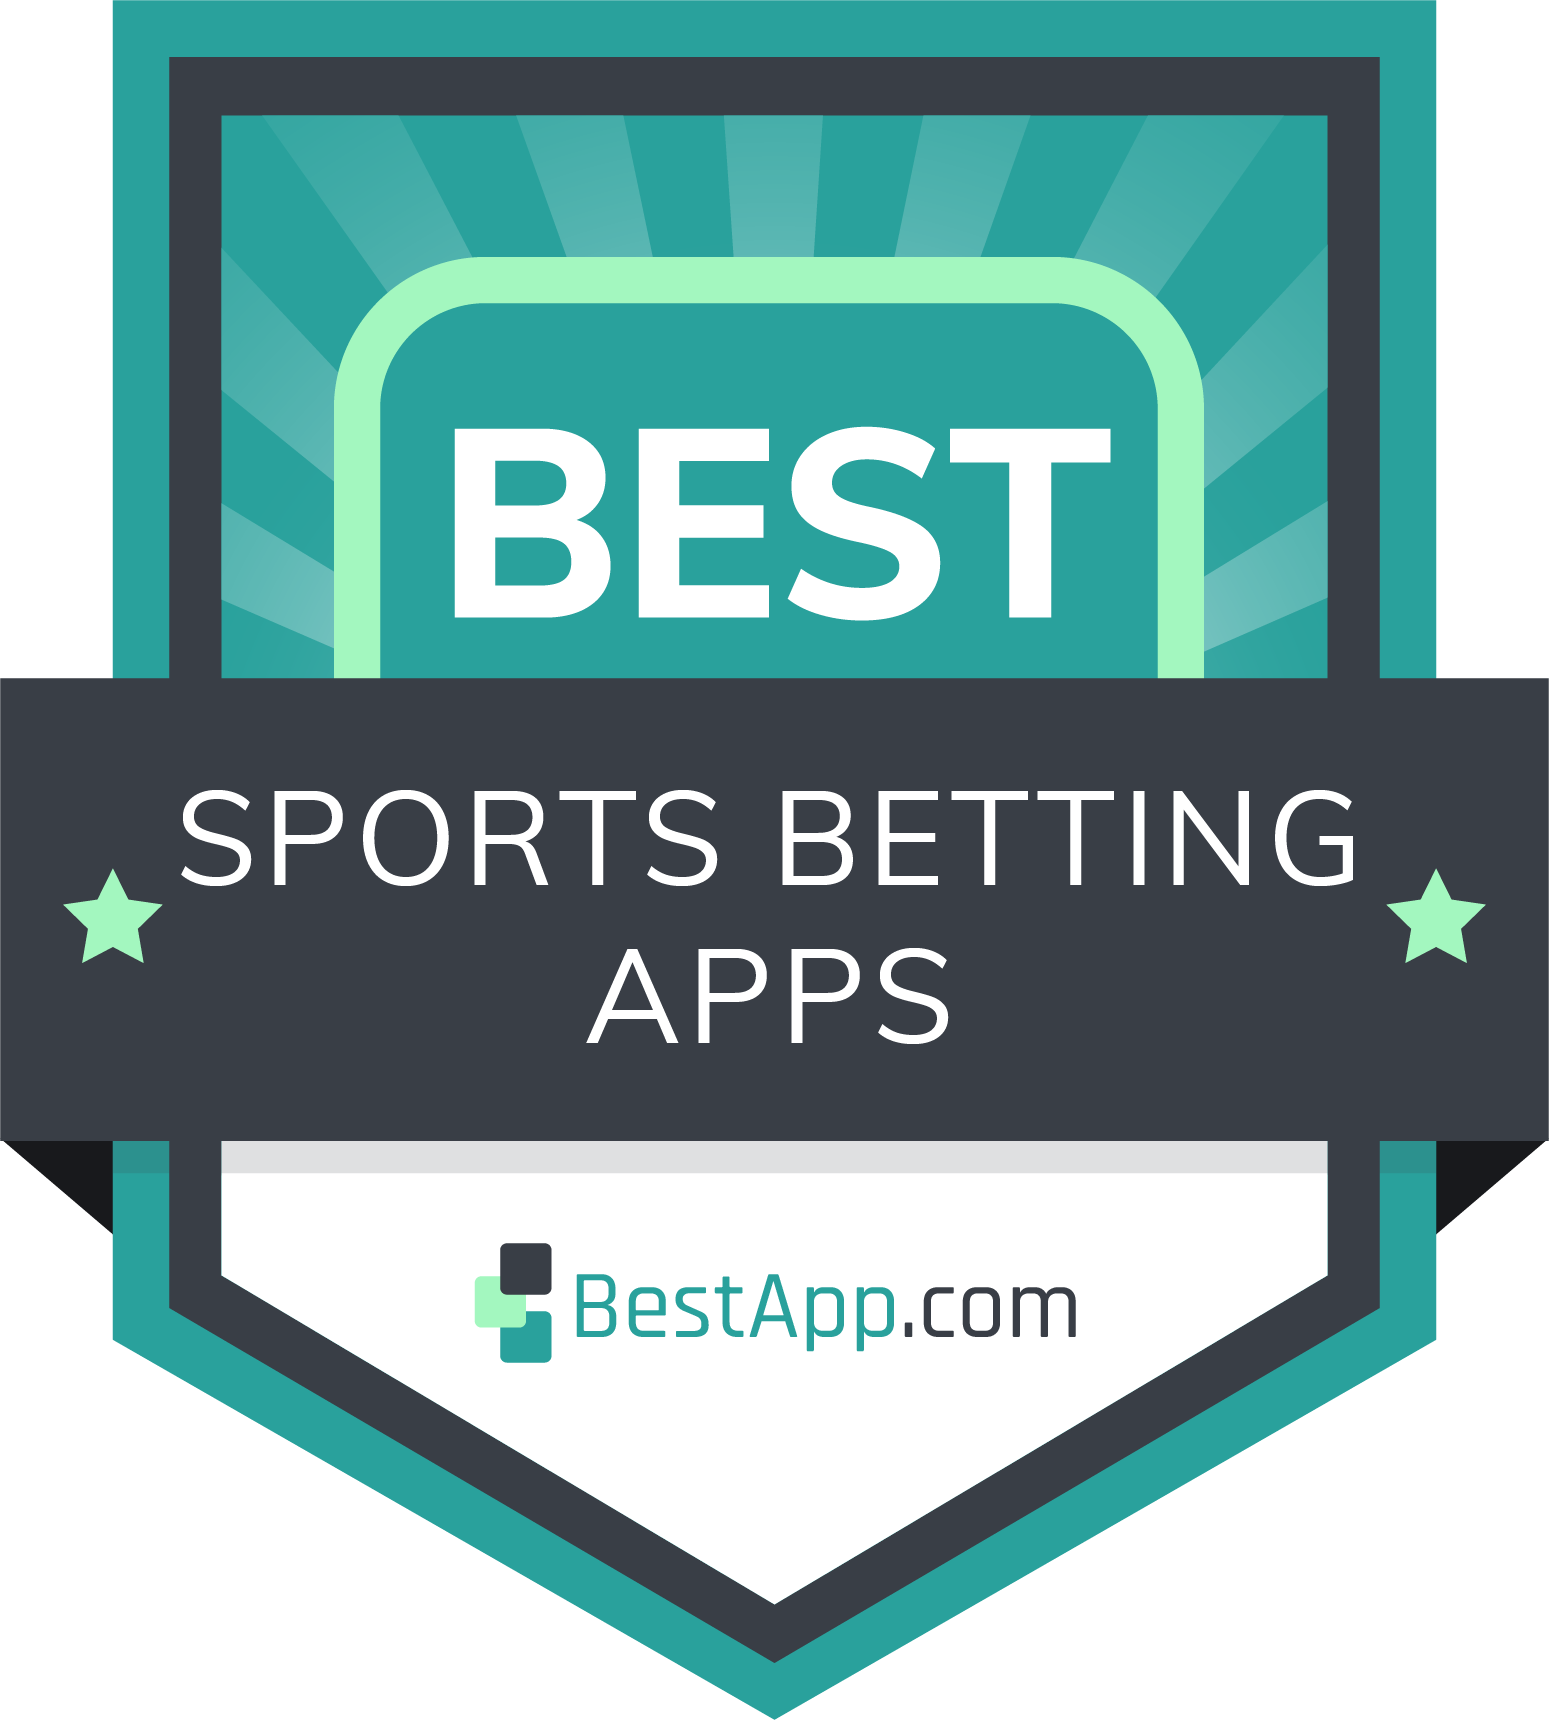 10 Reasons Why Having An Excellent Betting App Download Is Not Enough